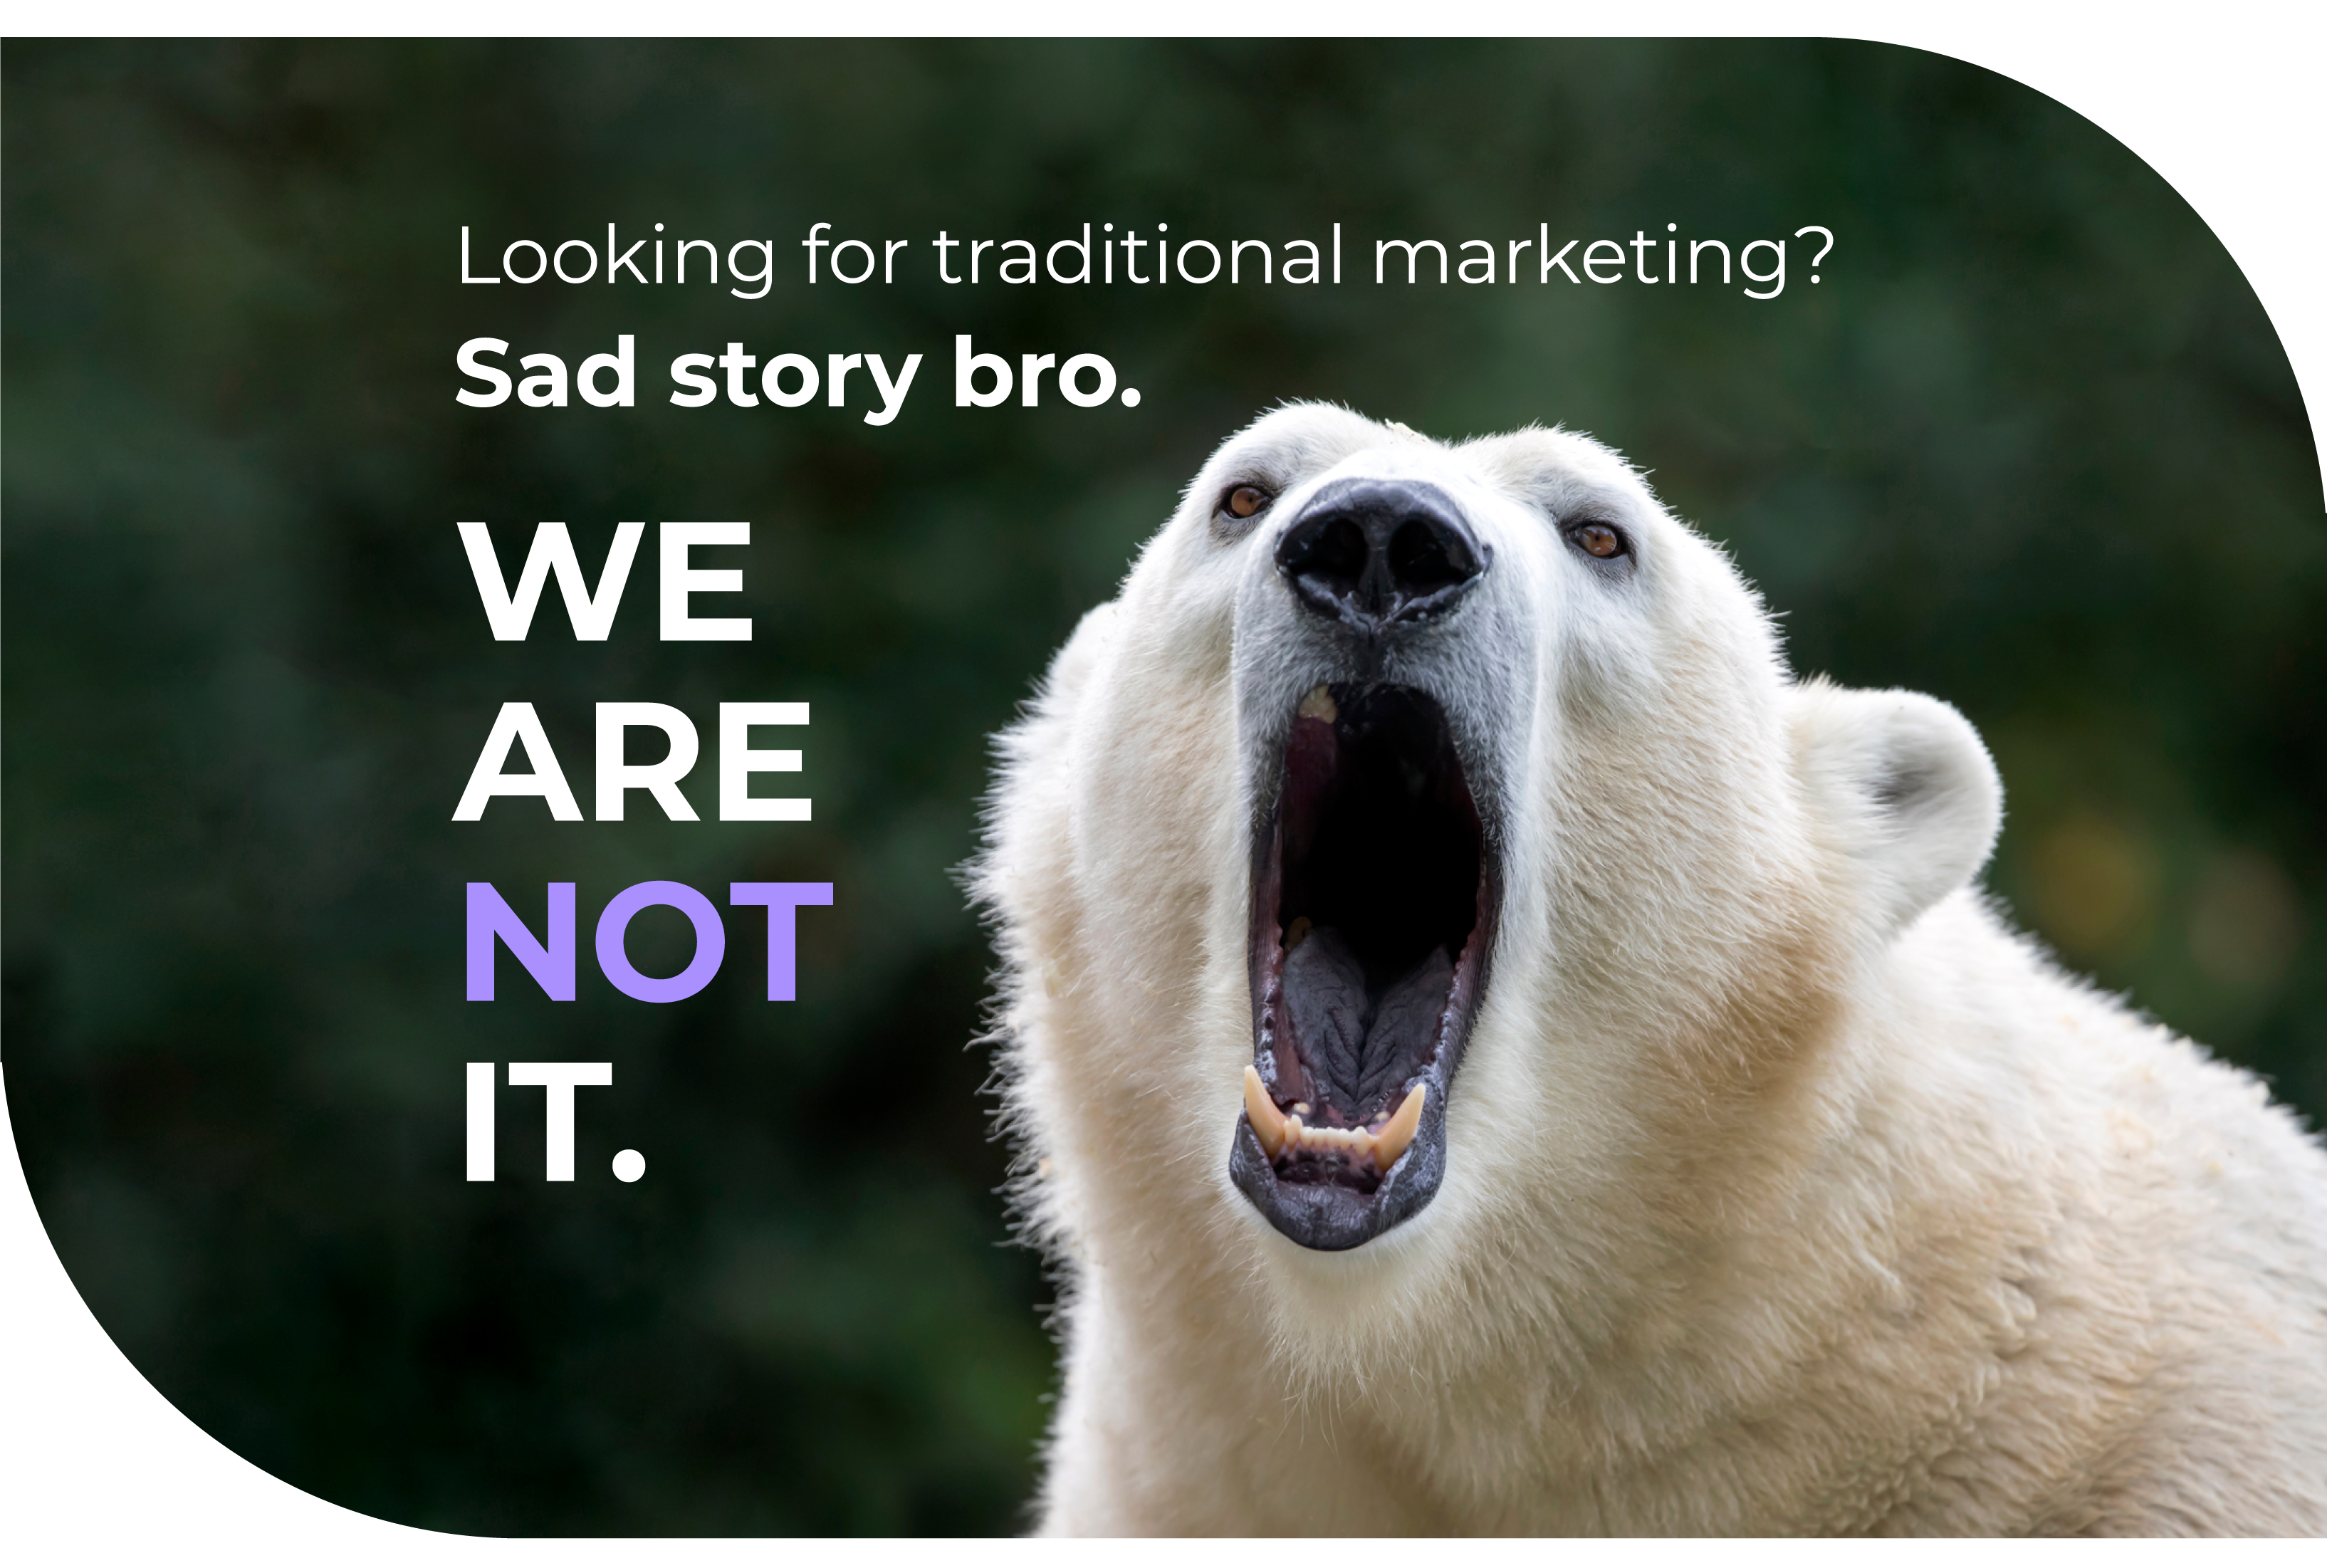 Looking for traditional marketing? Sad story bro. WE ARE NOT IT.